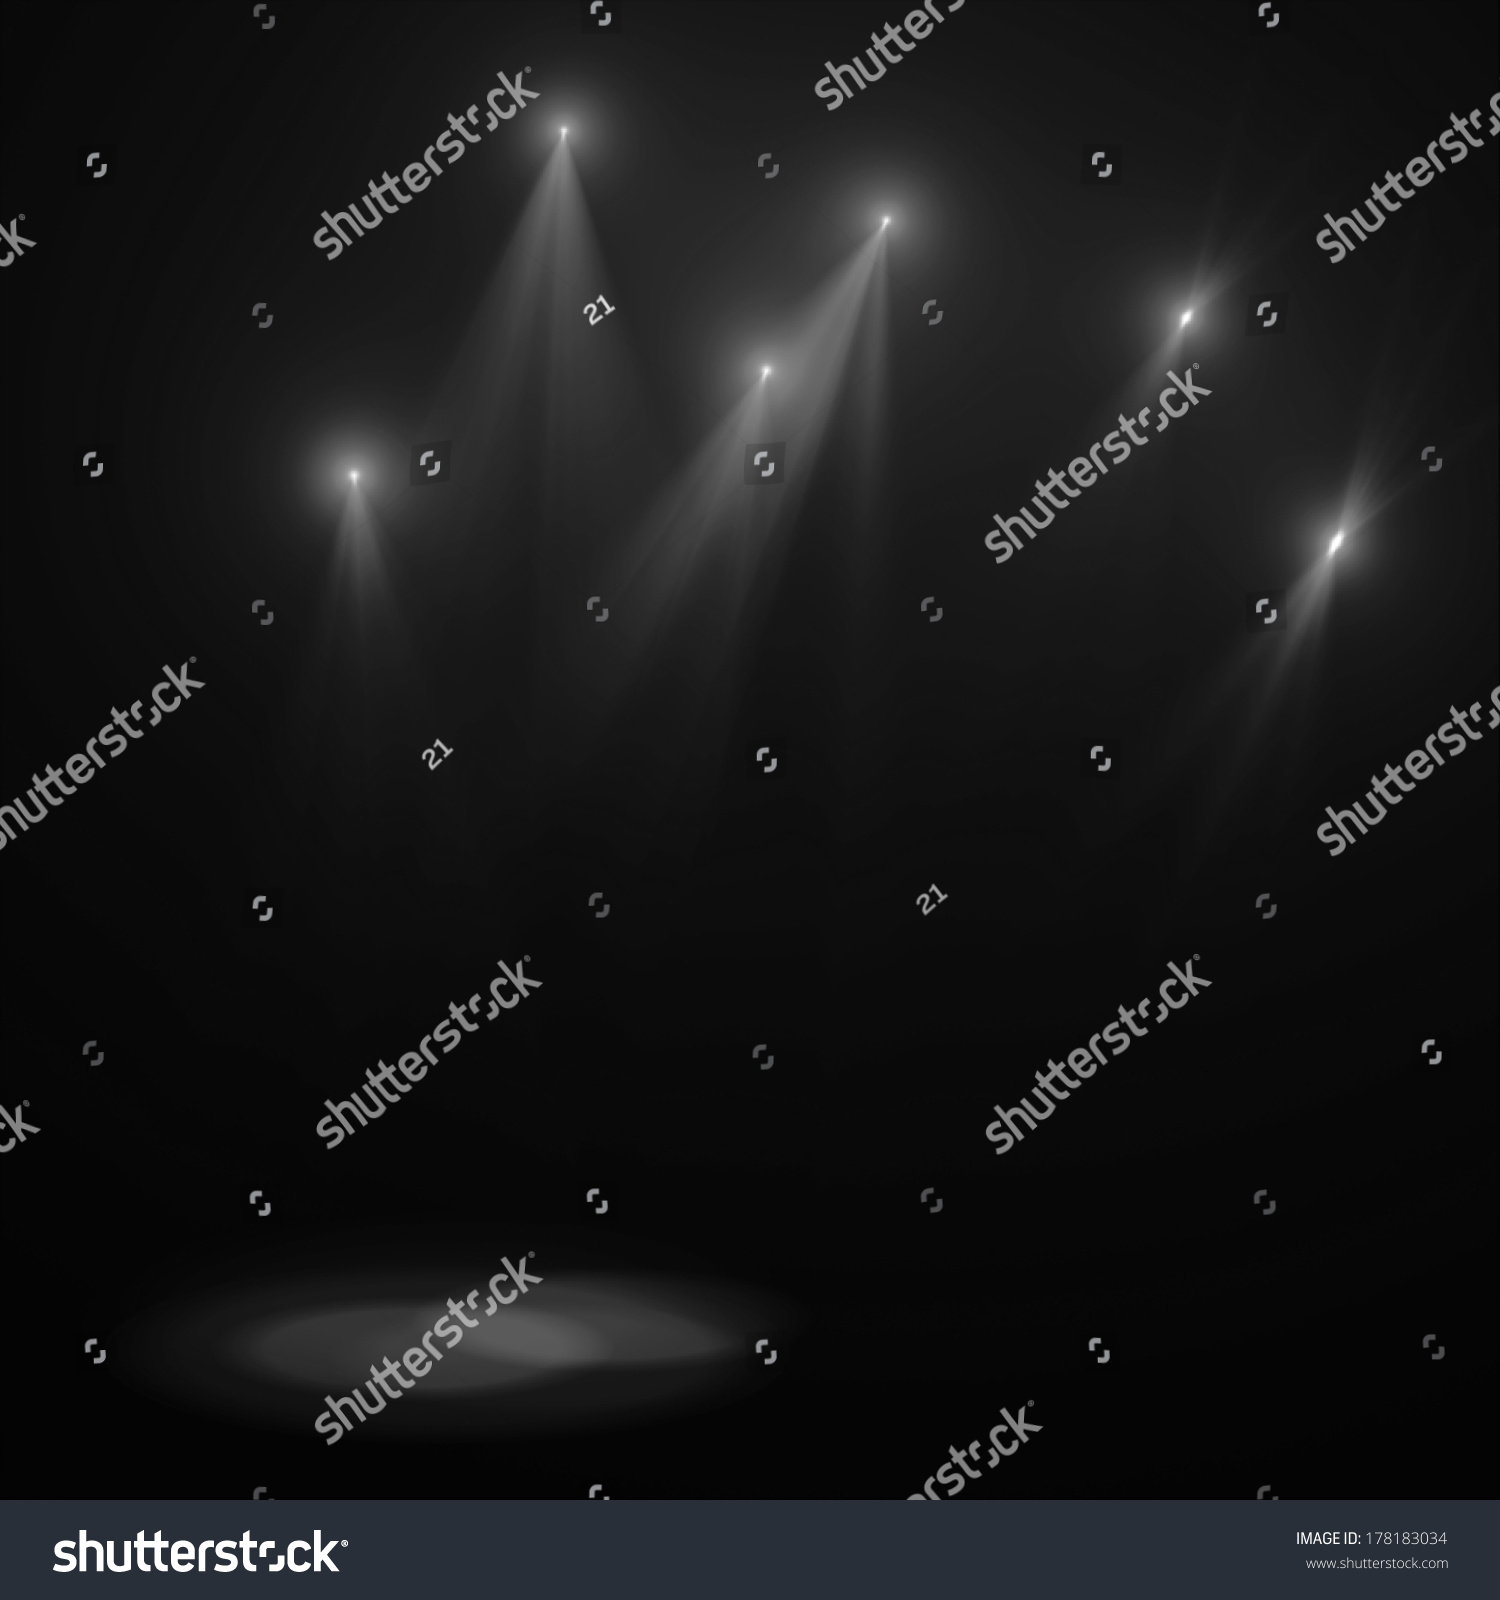 Abstract image of  lighting flare  #178183034